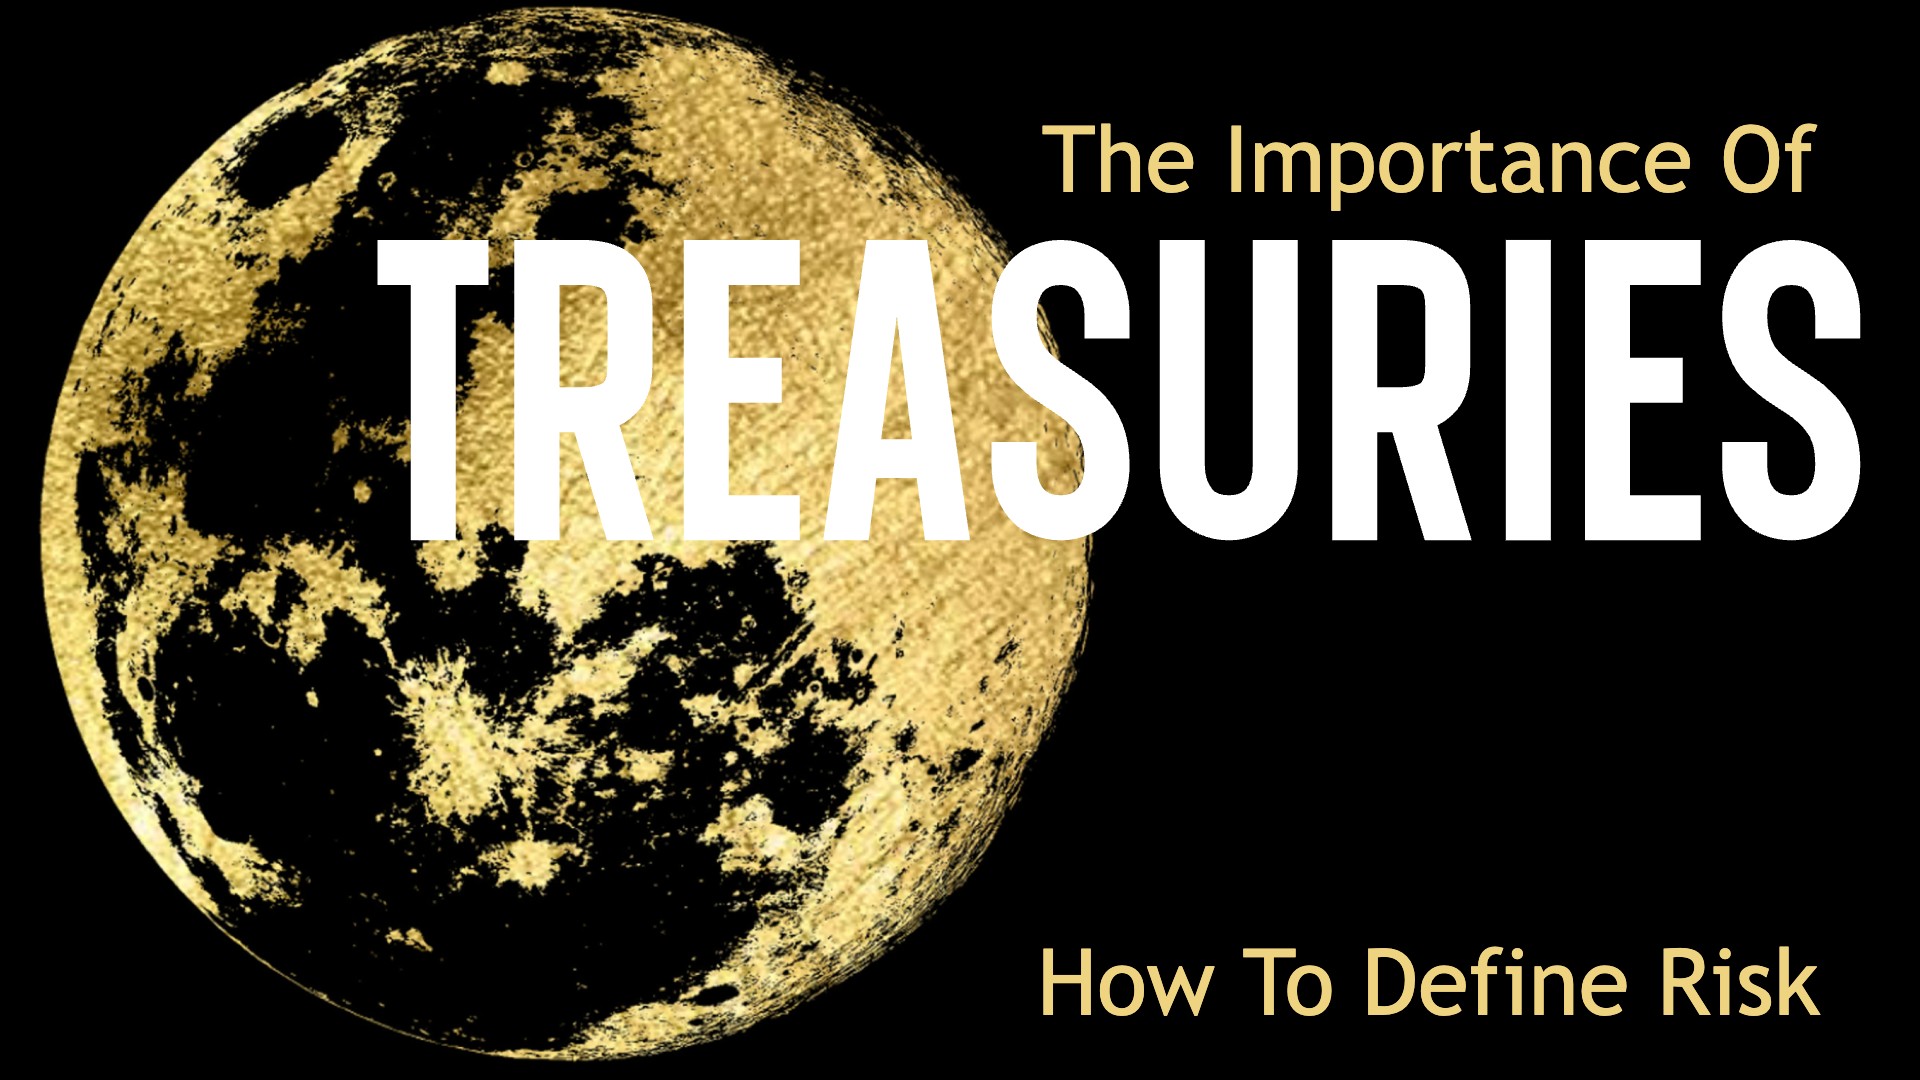 The Importance of Treasuries: How to Define Risk